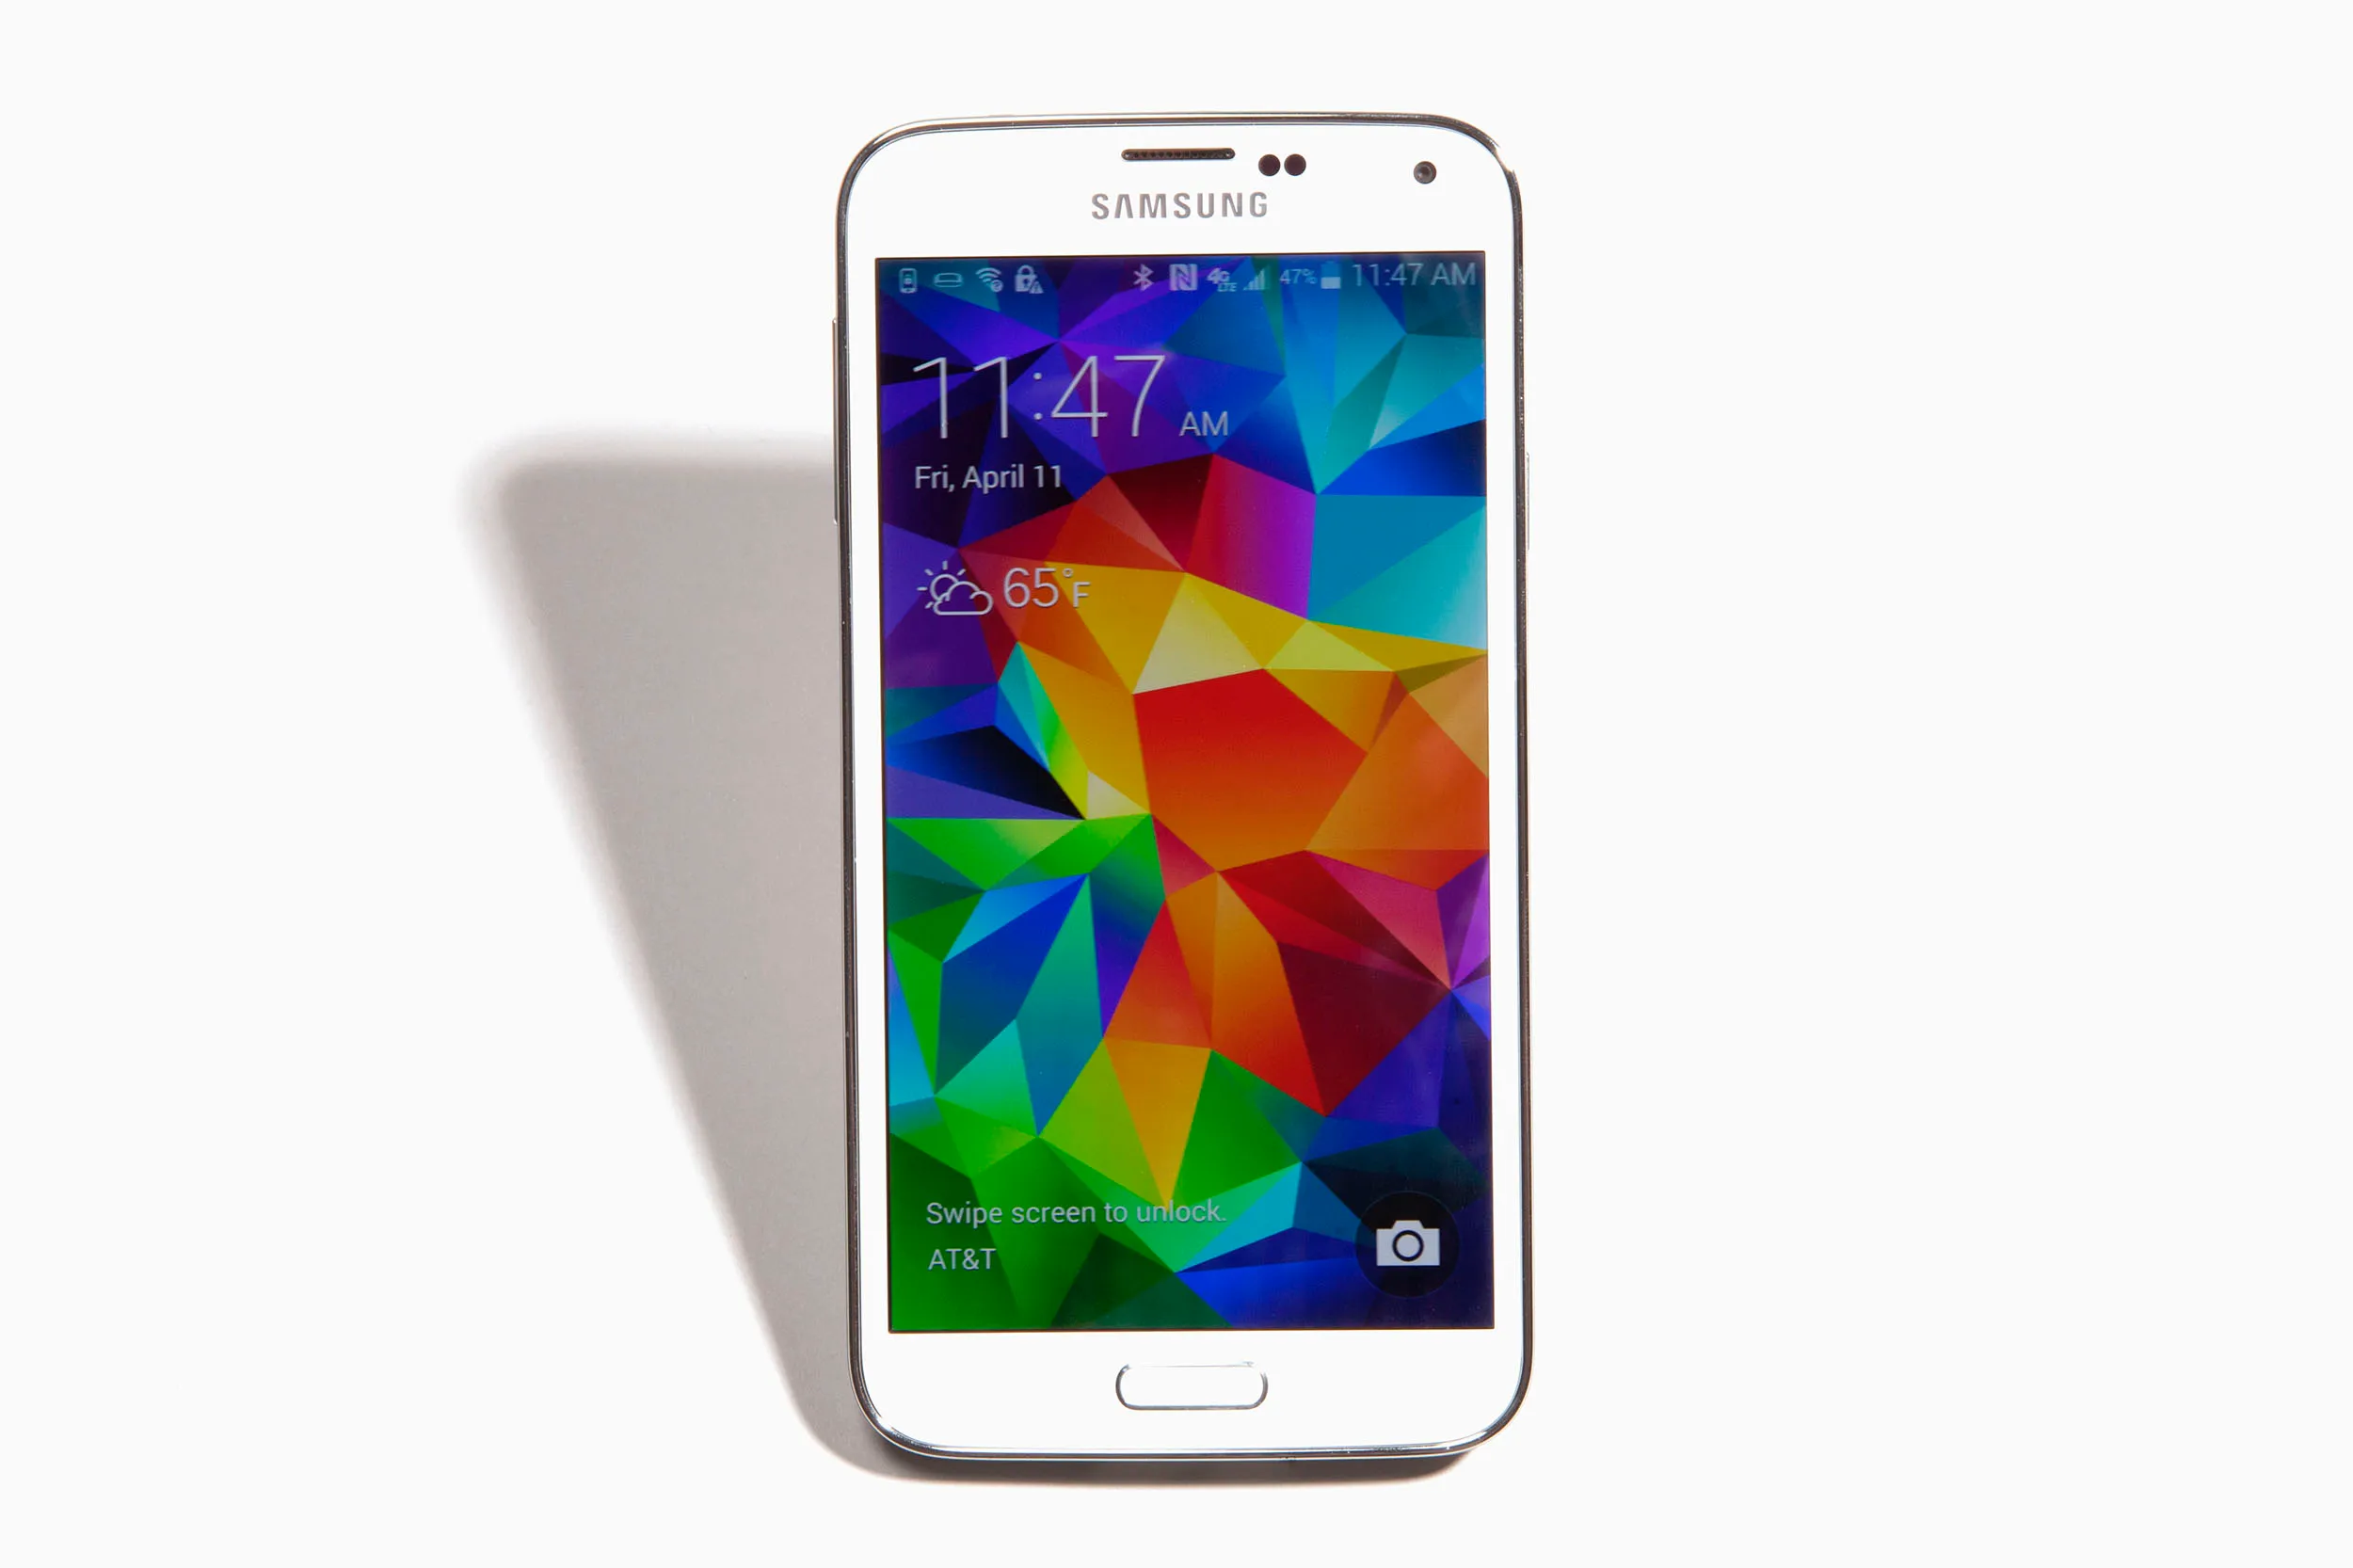 Solutions to Samsung Galaxy S5 won’t charge after overheating issue